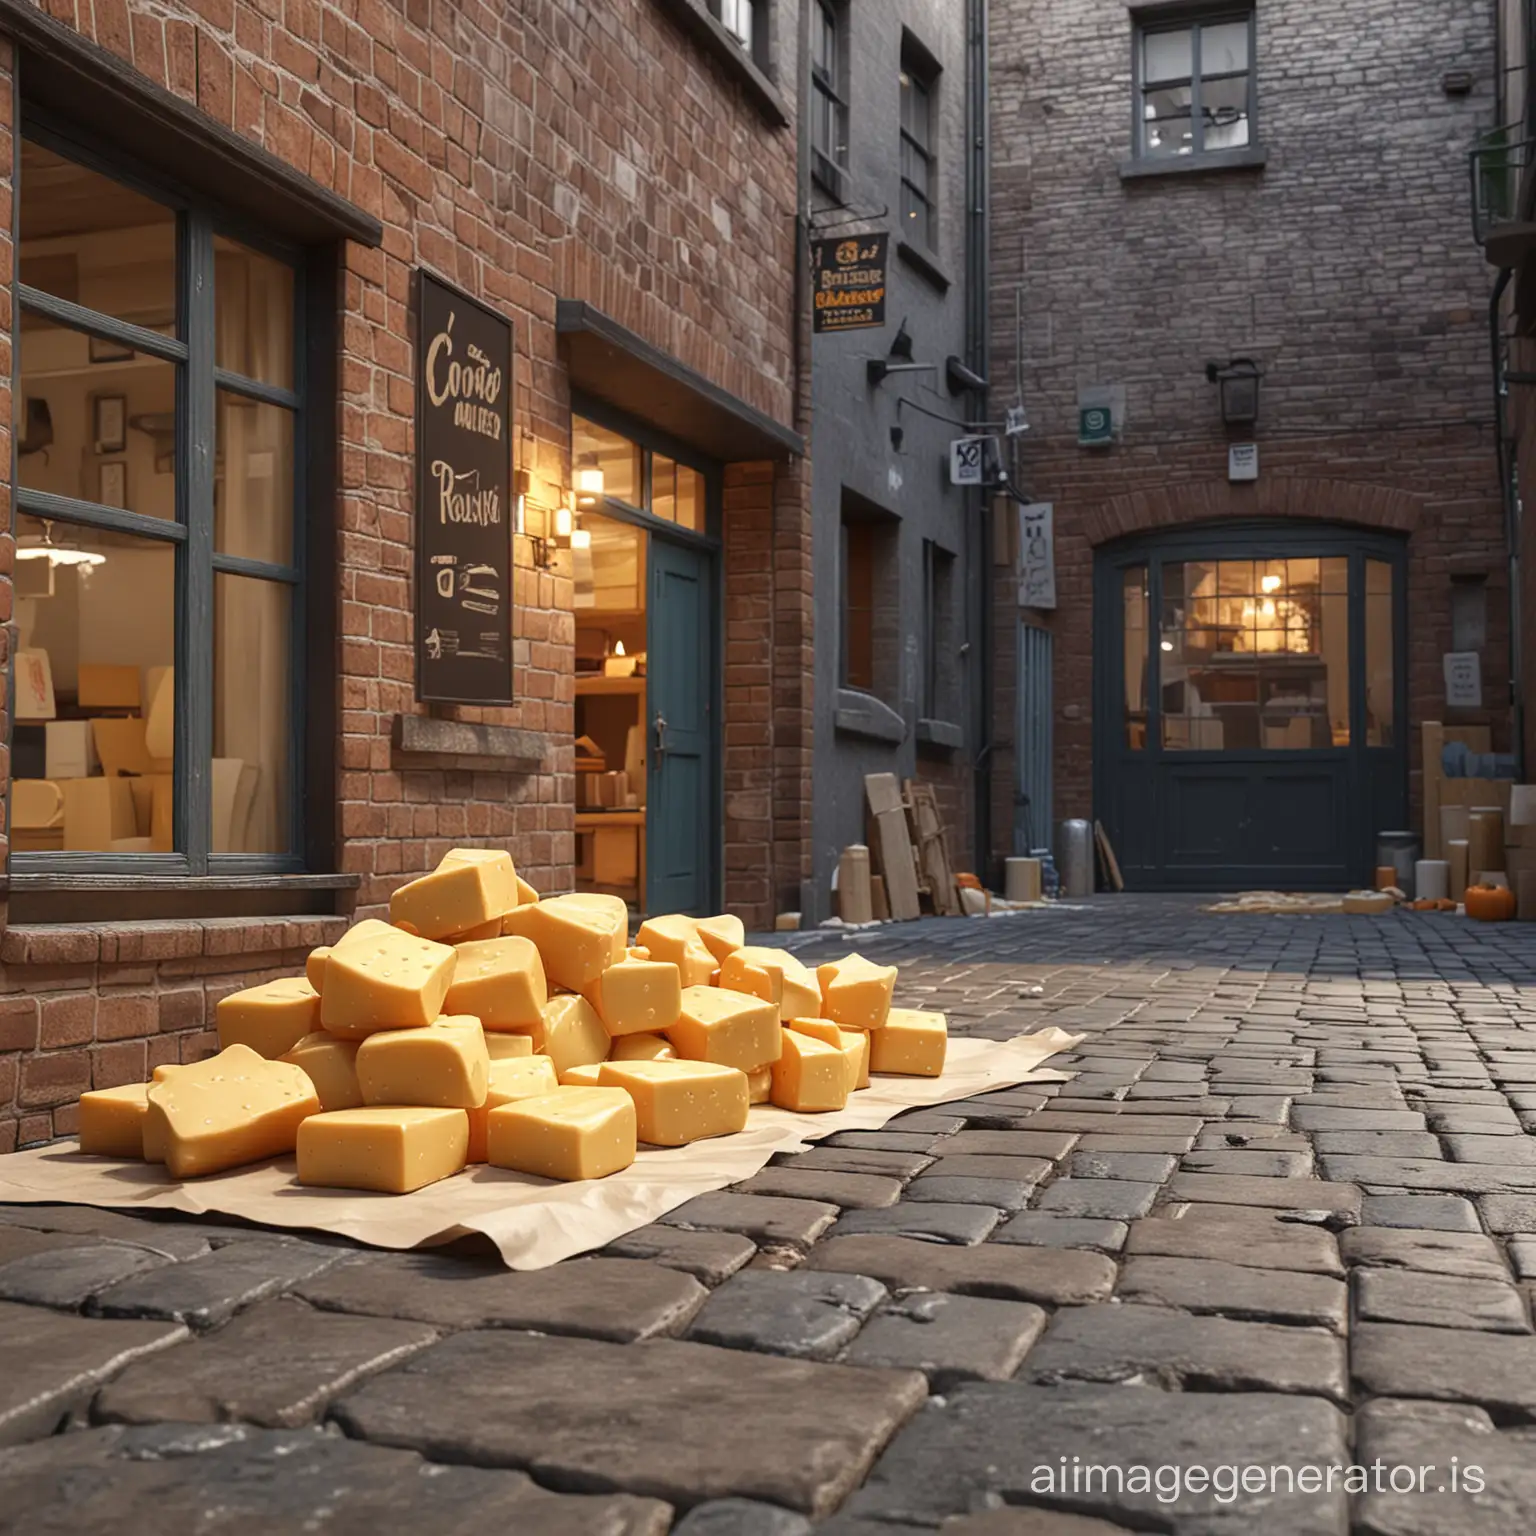 Cheese-Shop-Scene-Outdoor-Cartoon-3D-Render-with-Wrapped-Cheeses